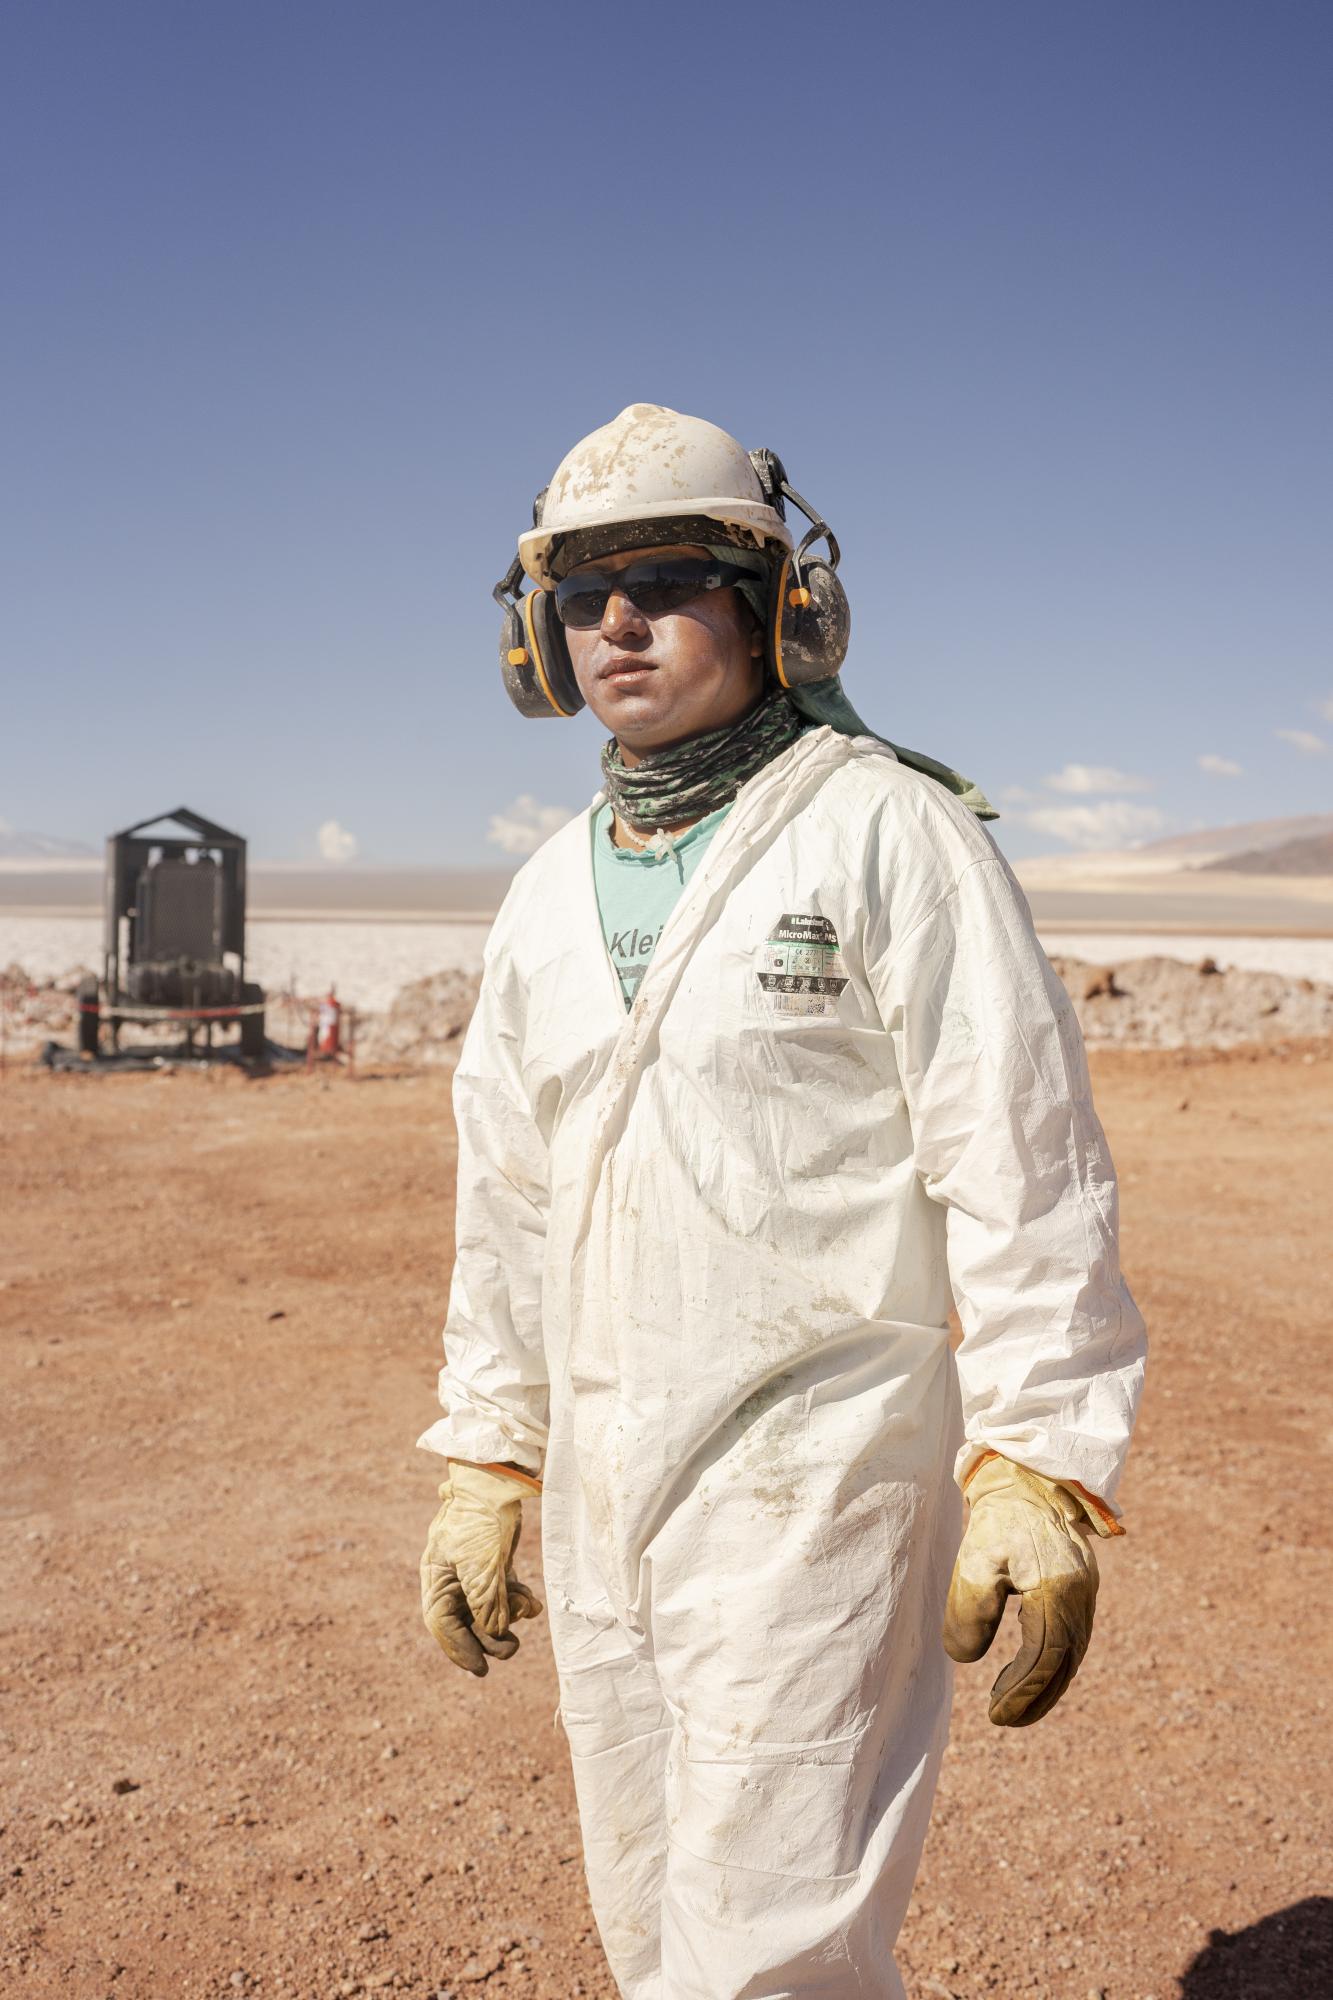 Lithium in Argentina - Worker at Lake Resources mining company. Photograph by...